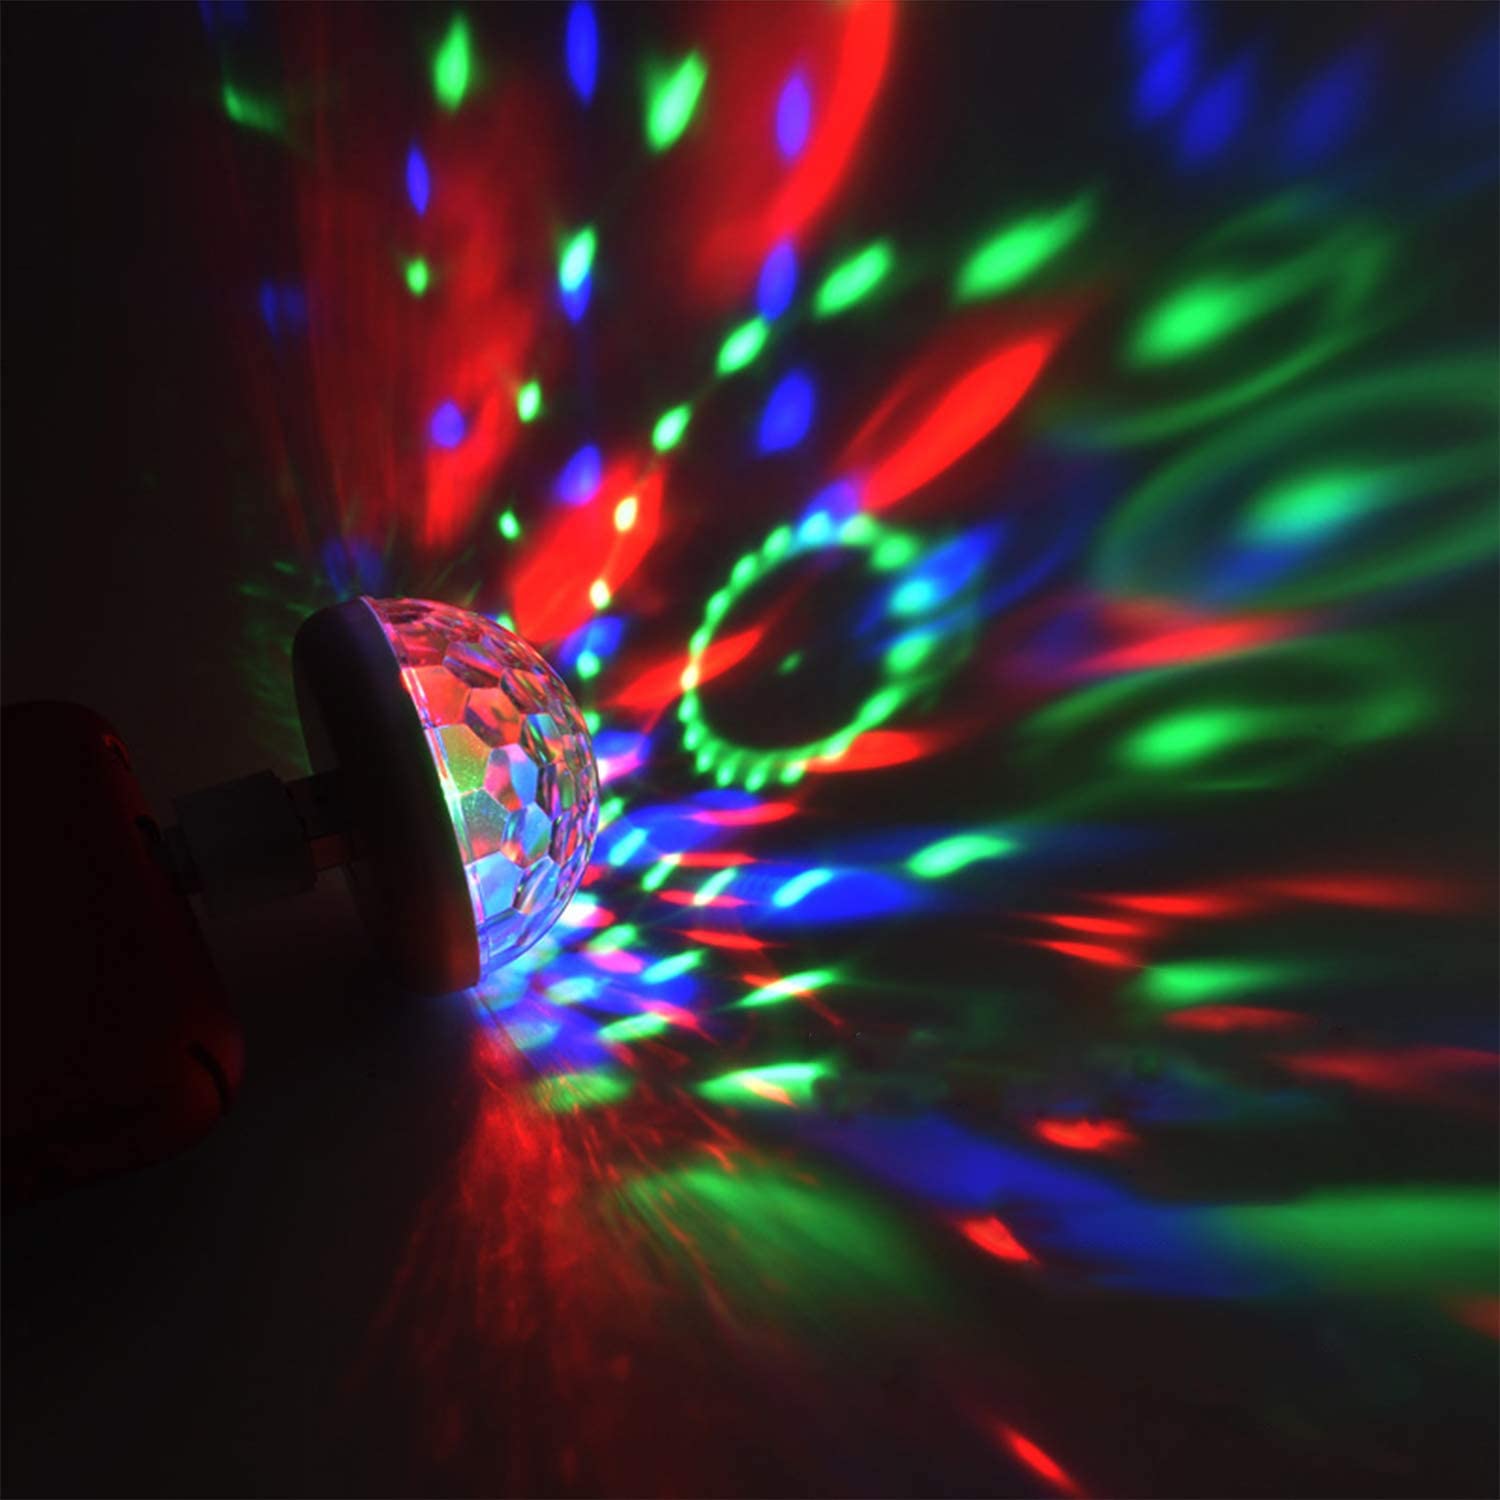 Sound-Activated-USB-Mini-Disco-Light-ReKeen-USB-Party-Light-DJ-LED-Lamps-for-Home-Room-Party-Birthda-1714375